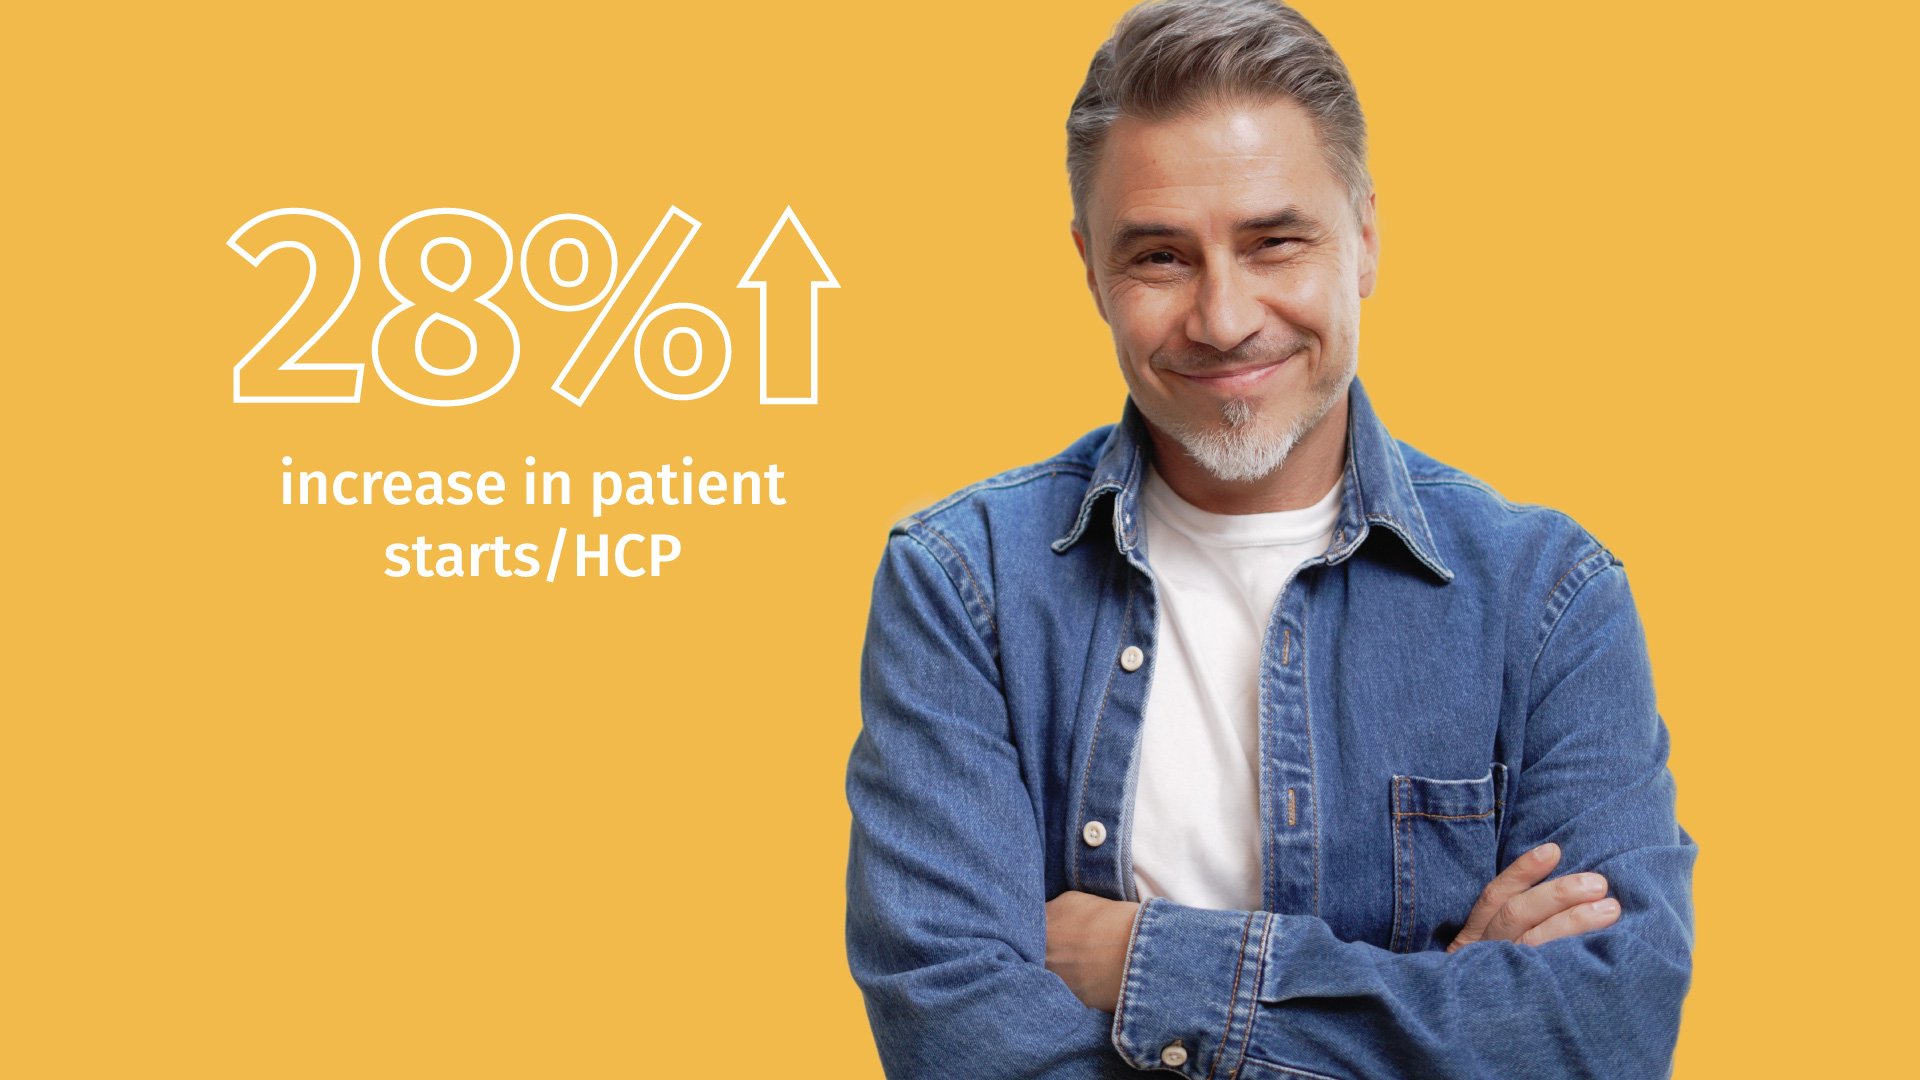 28% increase in patient starts/HCP